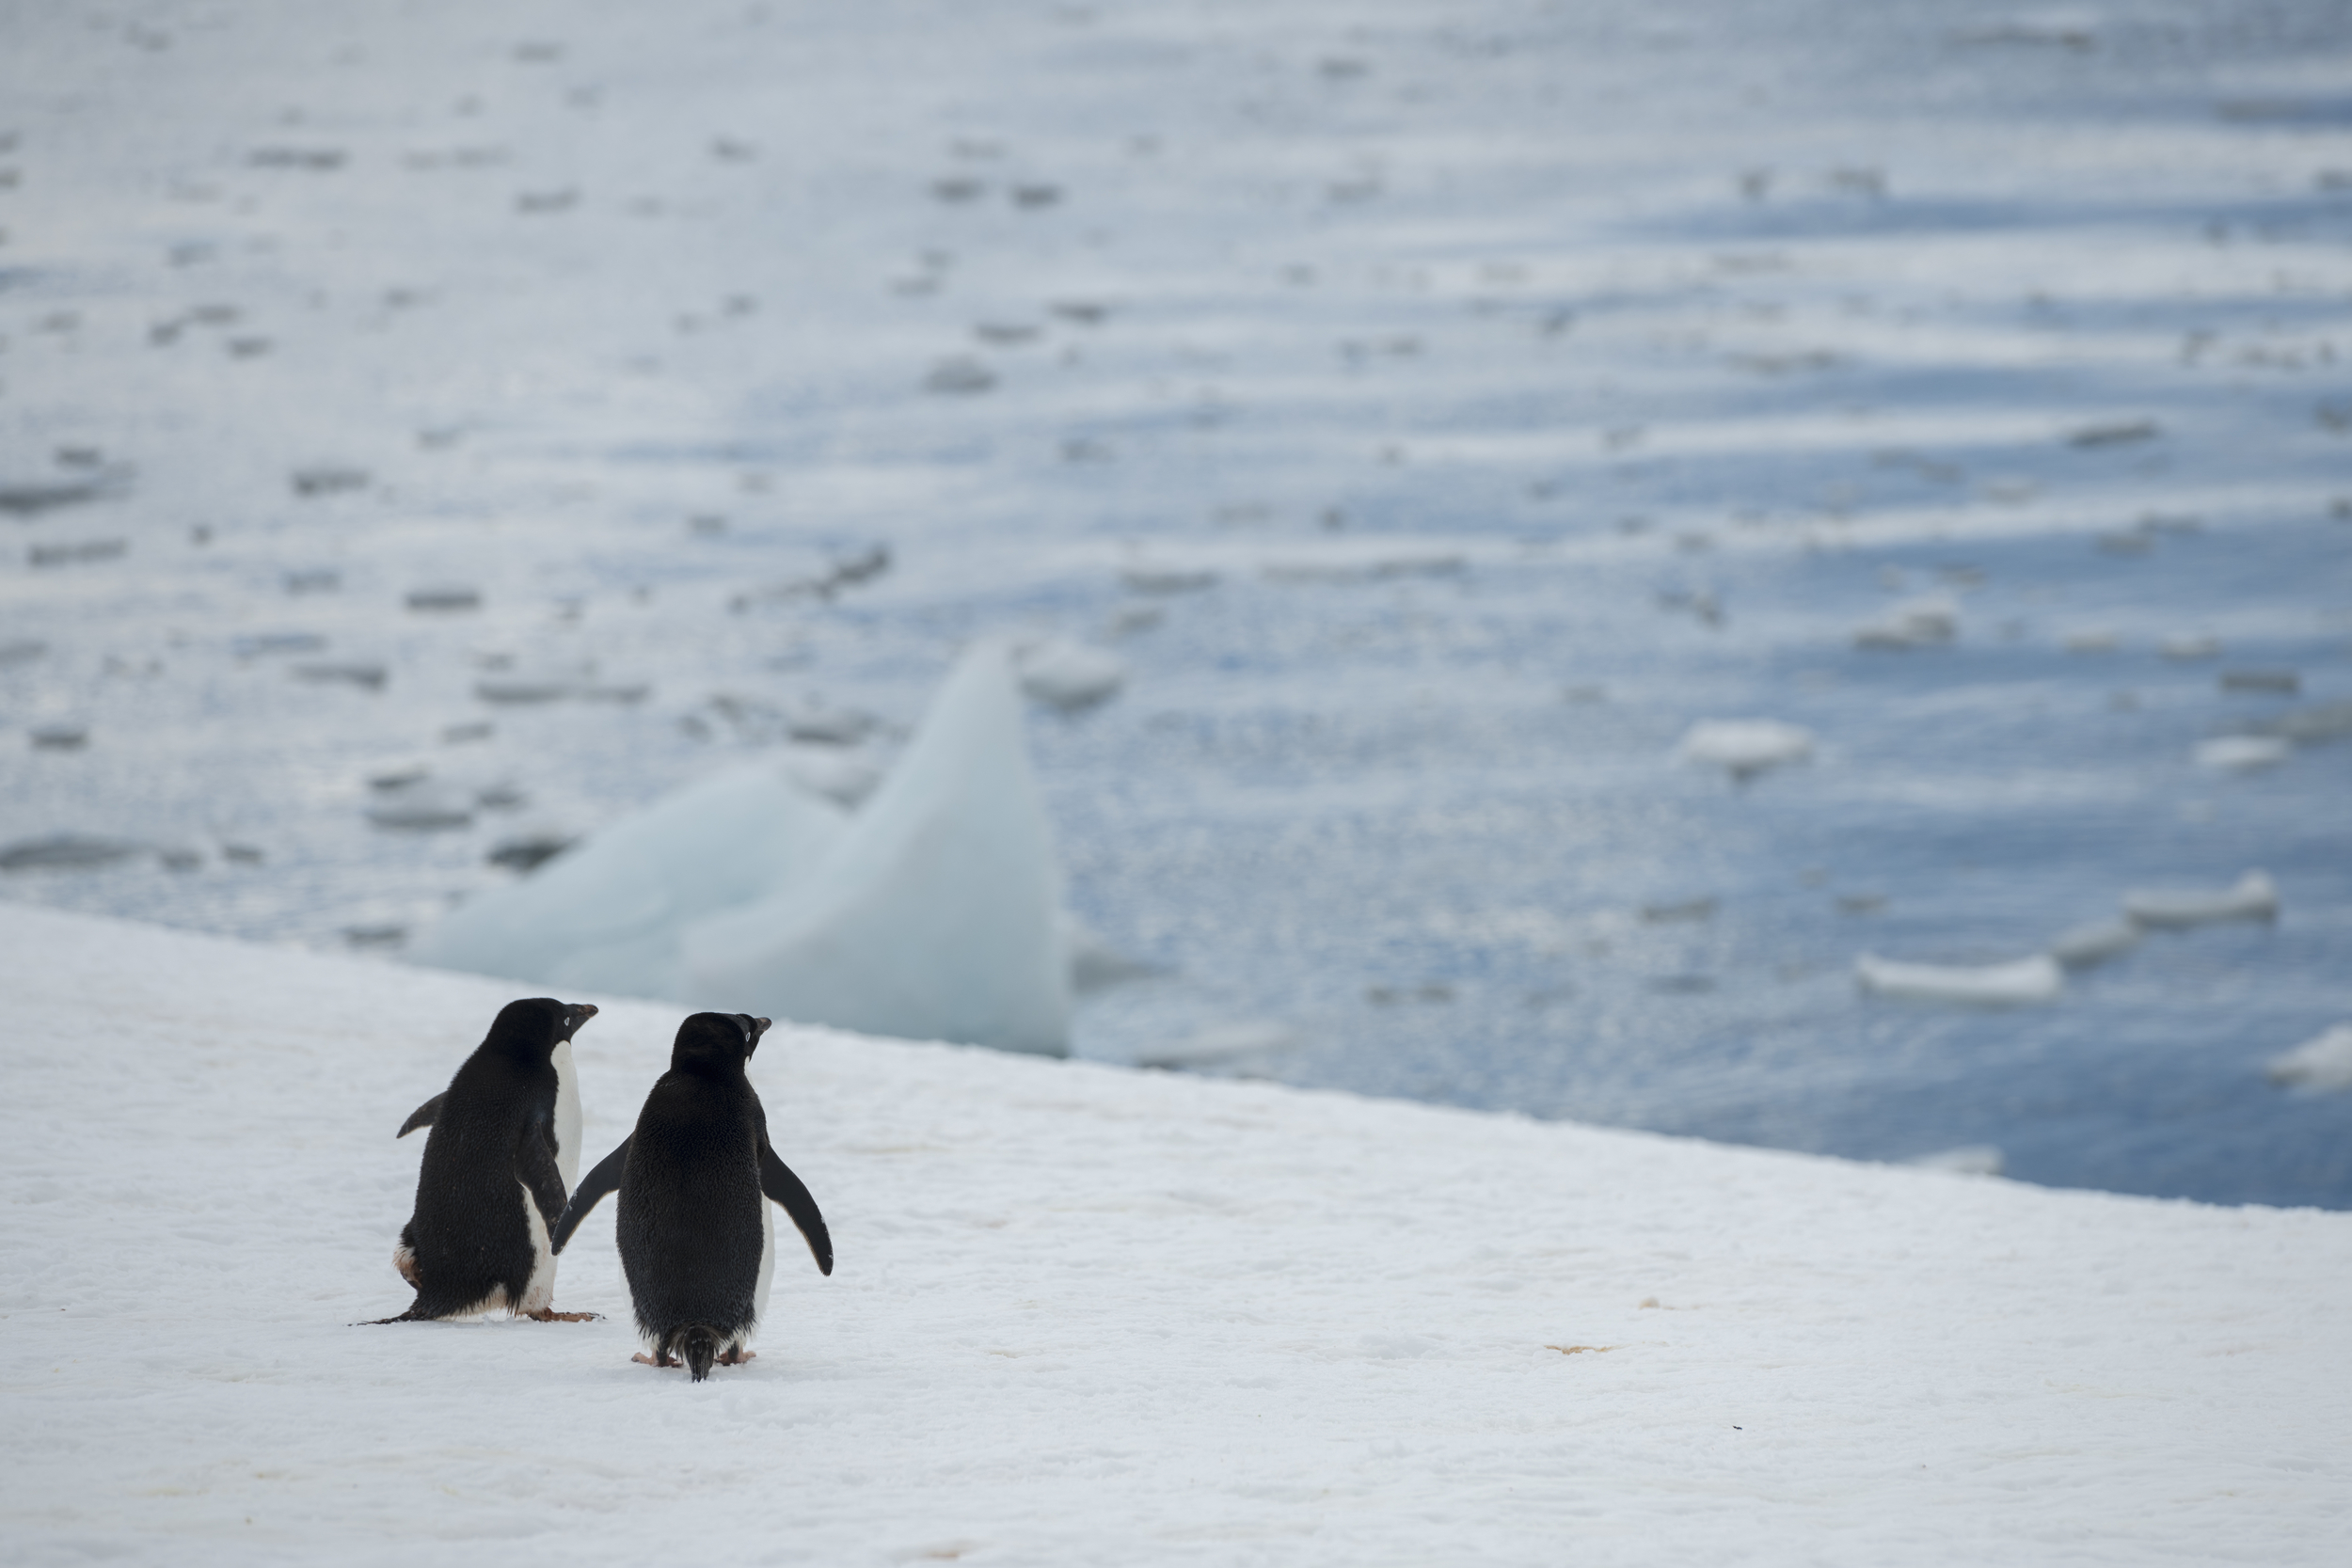 2 penguins on the edge of the ice